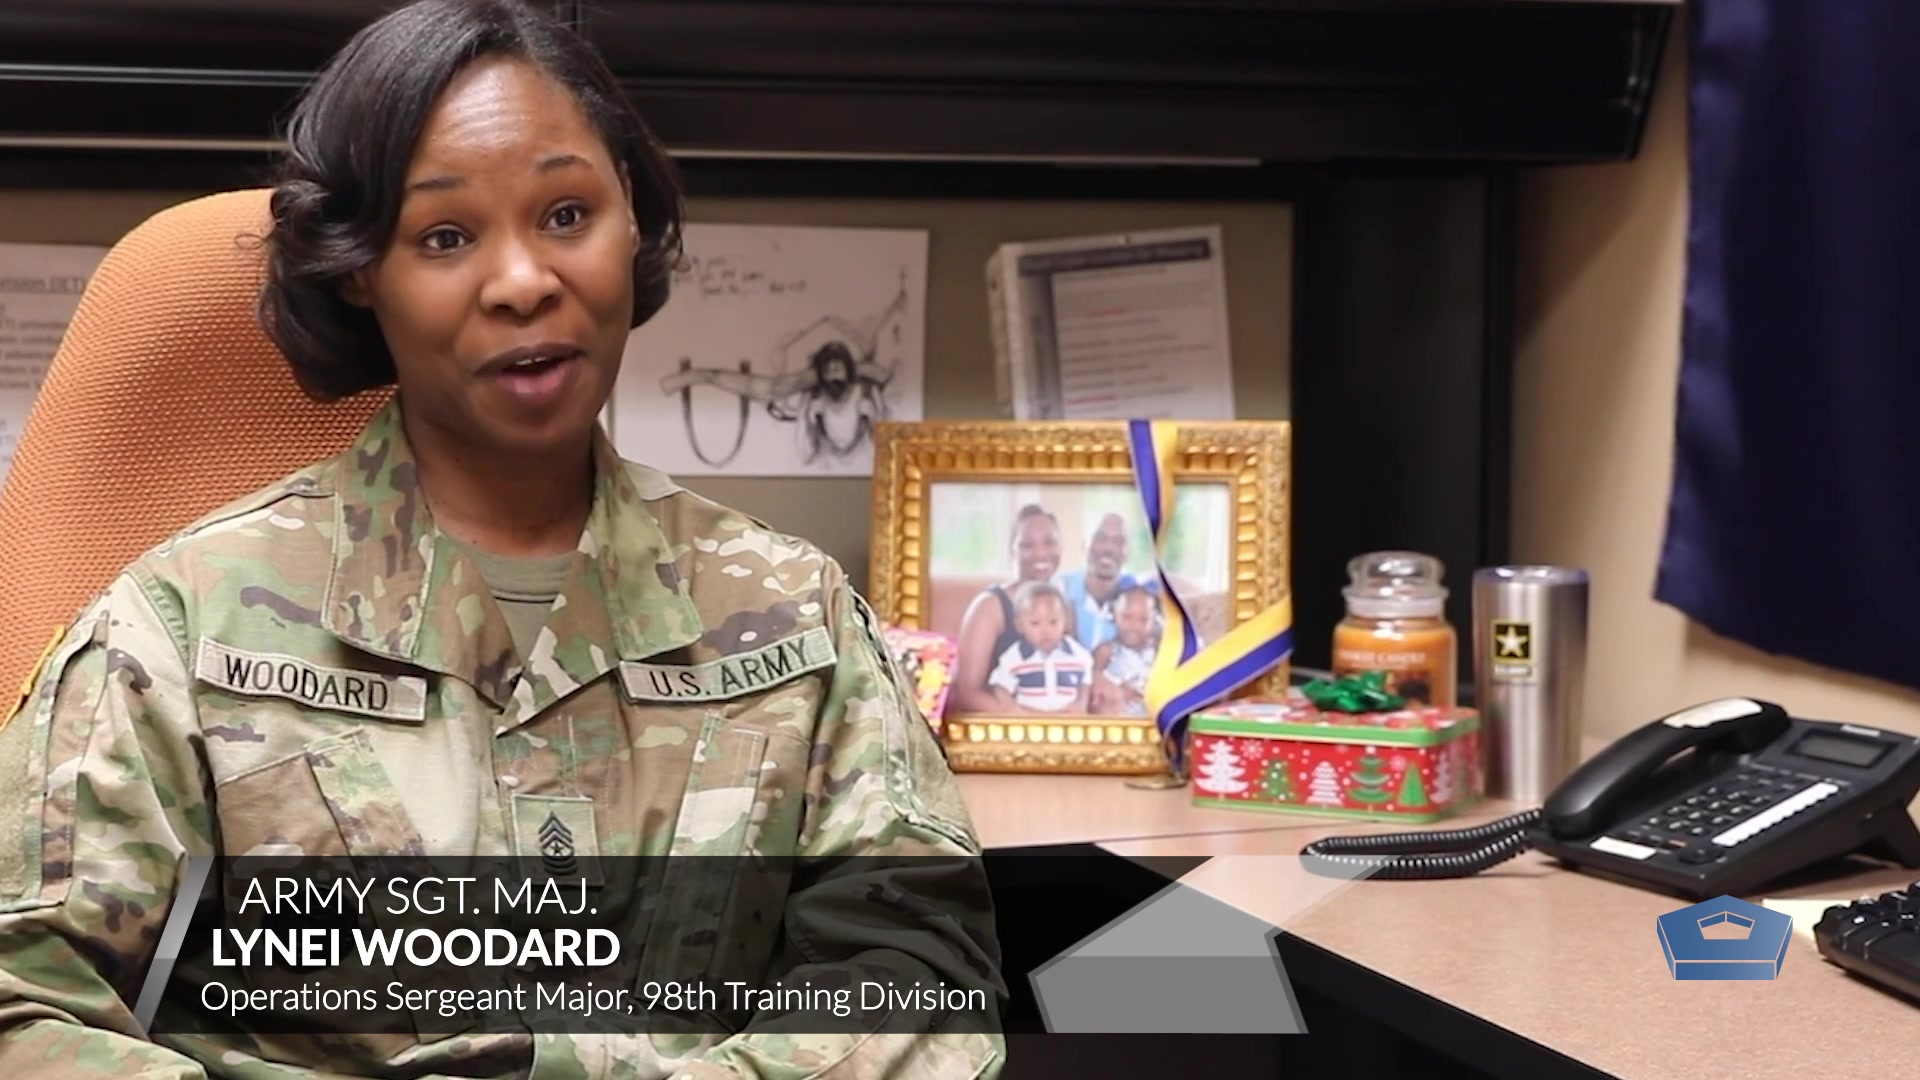 Everyone finds motivation in different places. For Army Sgt. Maj. Lynei Woodard, it's intensely personal.

Woodard, who is the operations sergeant major at the 98th Training Division (IET), has remained deeply driven and focused for years. This Army Reserve #Soldier has not only served her nation since she was 17 years old, but she earned three degrees and established a career in nursing, all while raising a family.

As she prepares to retire from military service, she reflects on what has propelled her to achieve so much.